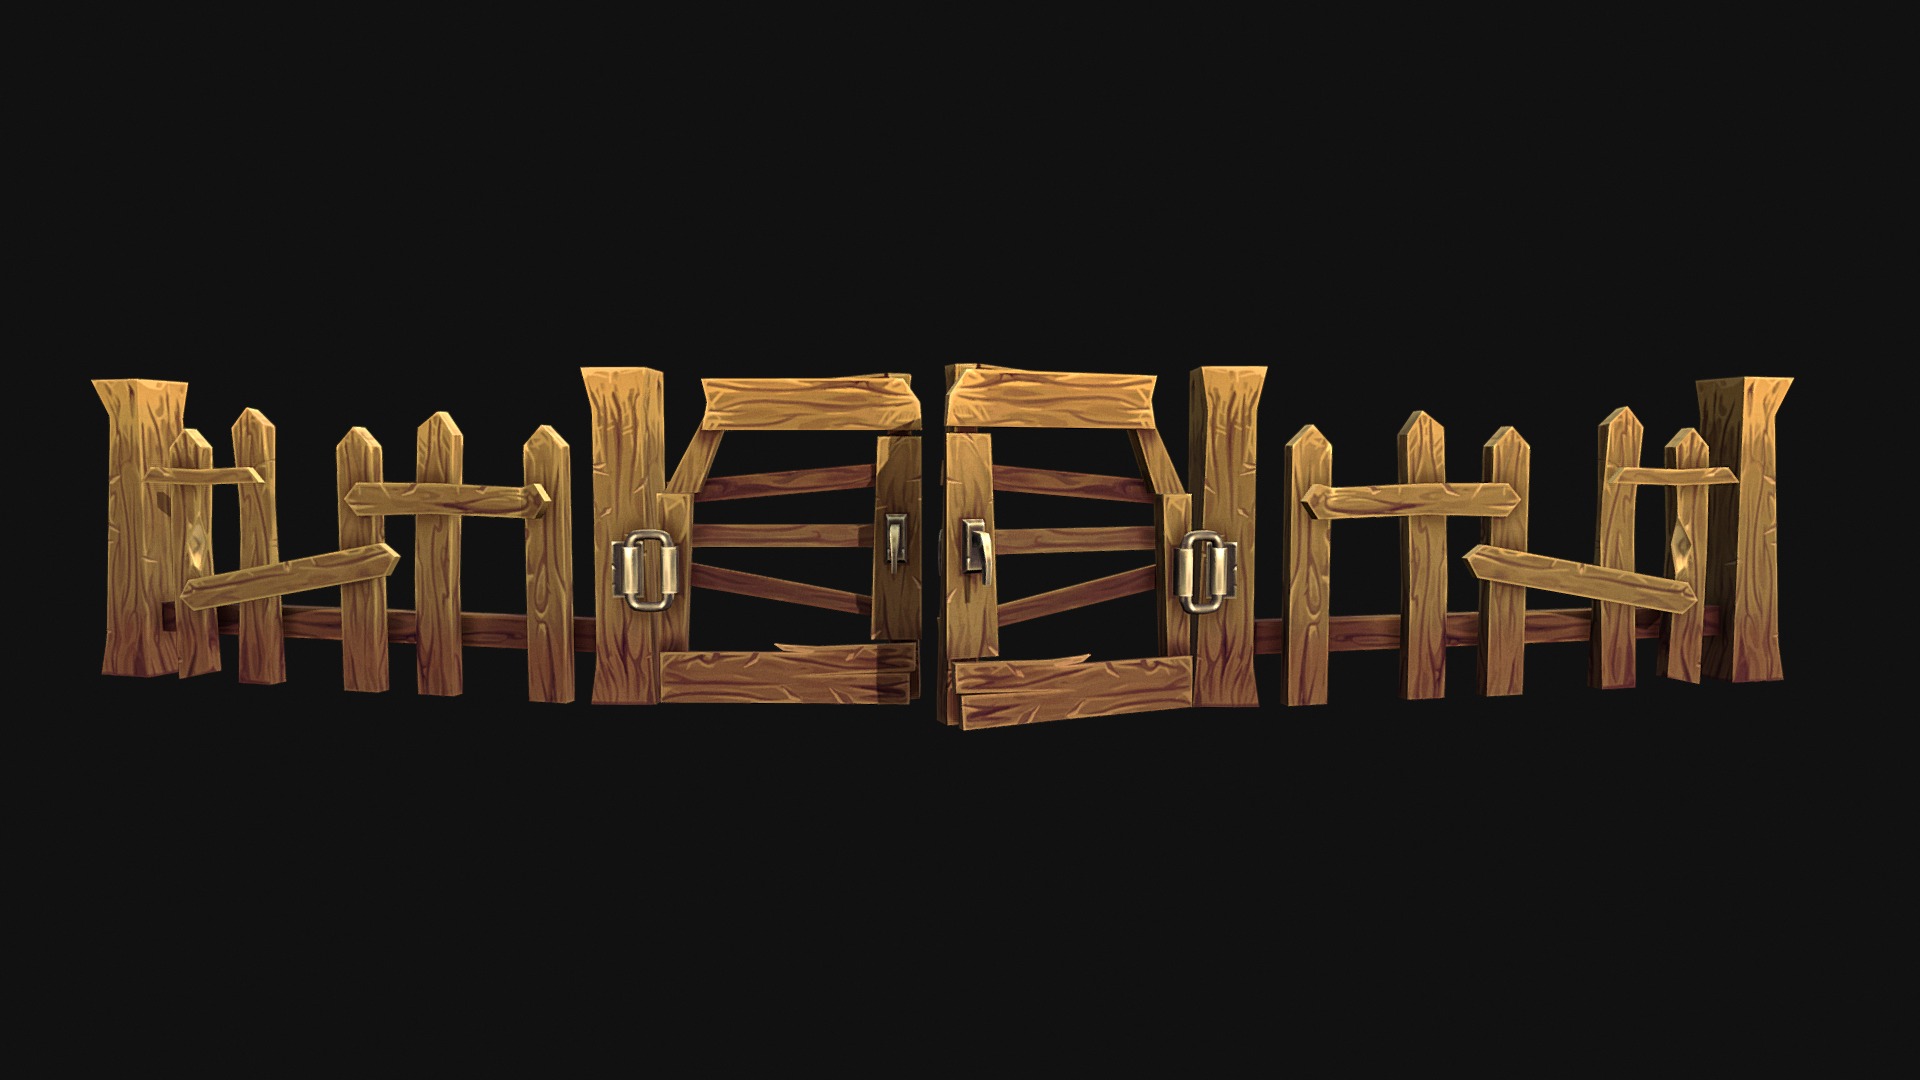 3D model Modular_Fence - This is a 3D model of the Modular_Fence. The 3D model is about a group of wooden letters.